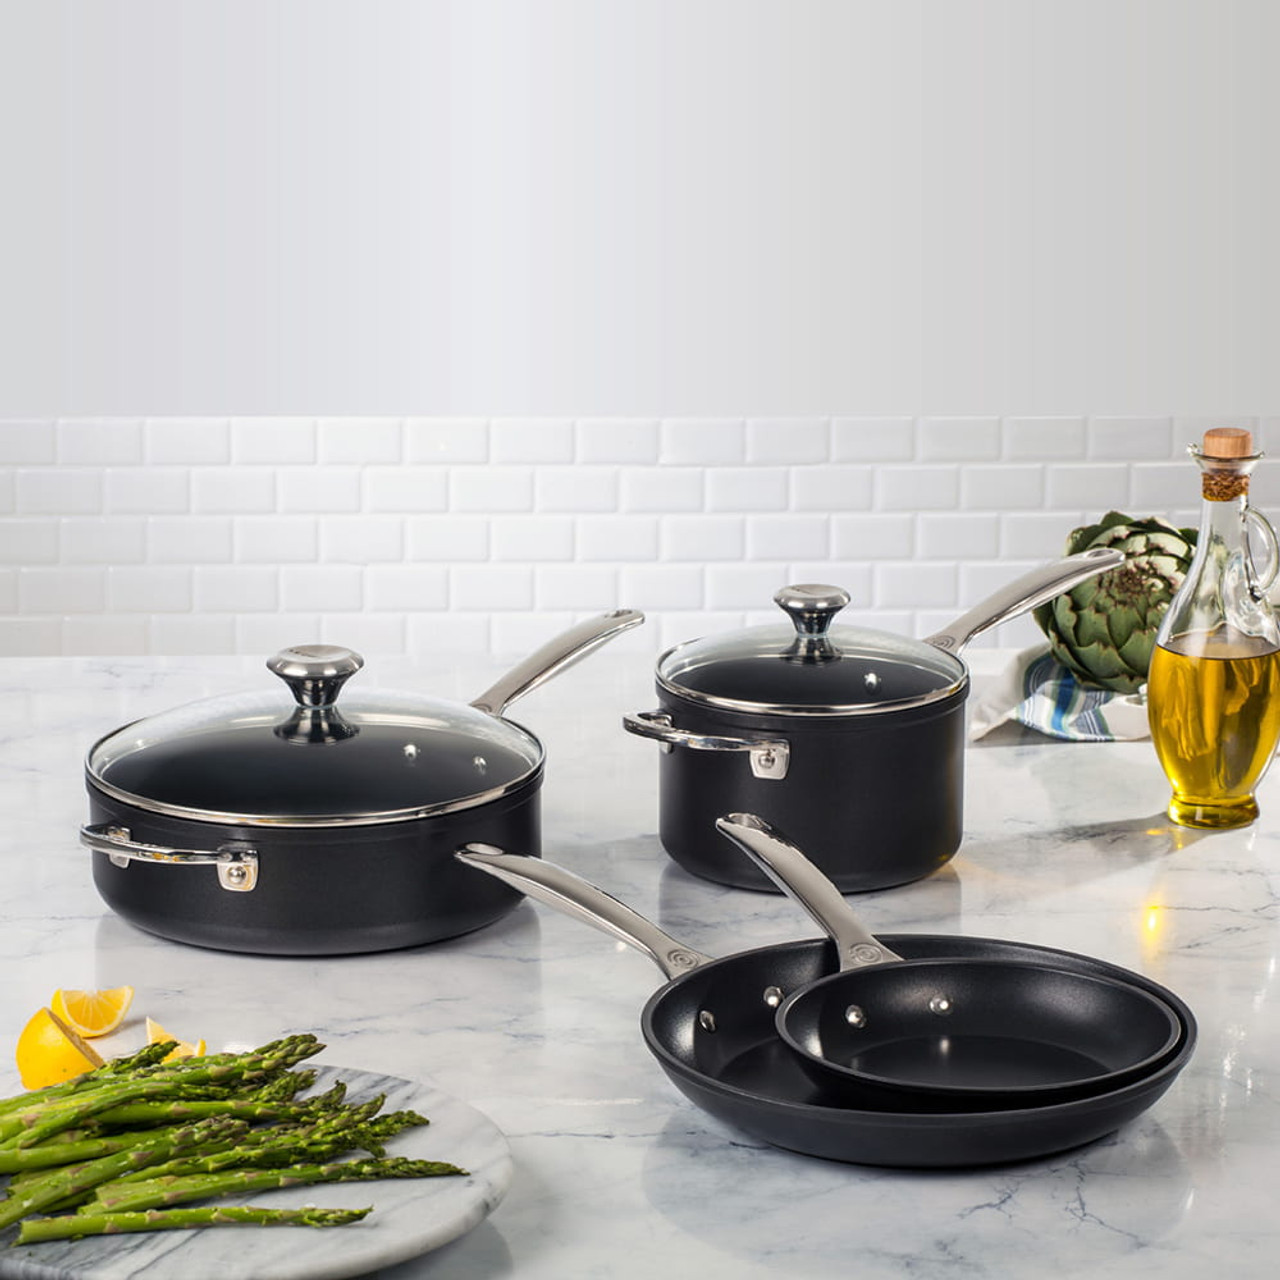 https://cdn11.bigcommerce.com/s-hccytny0od/images/stencil/1280x1280/products/3305/11834/le-creuset-tns-pro-6pc-cookware-set-1__63695.1592343948.jpg?c=2?imbypass=on